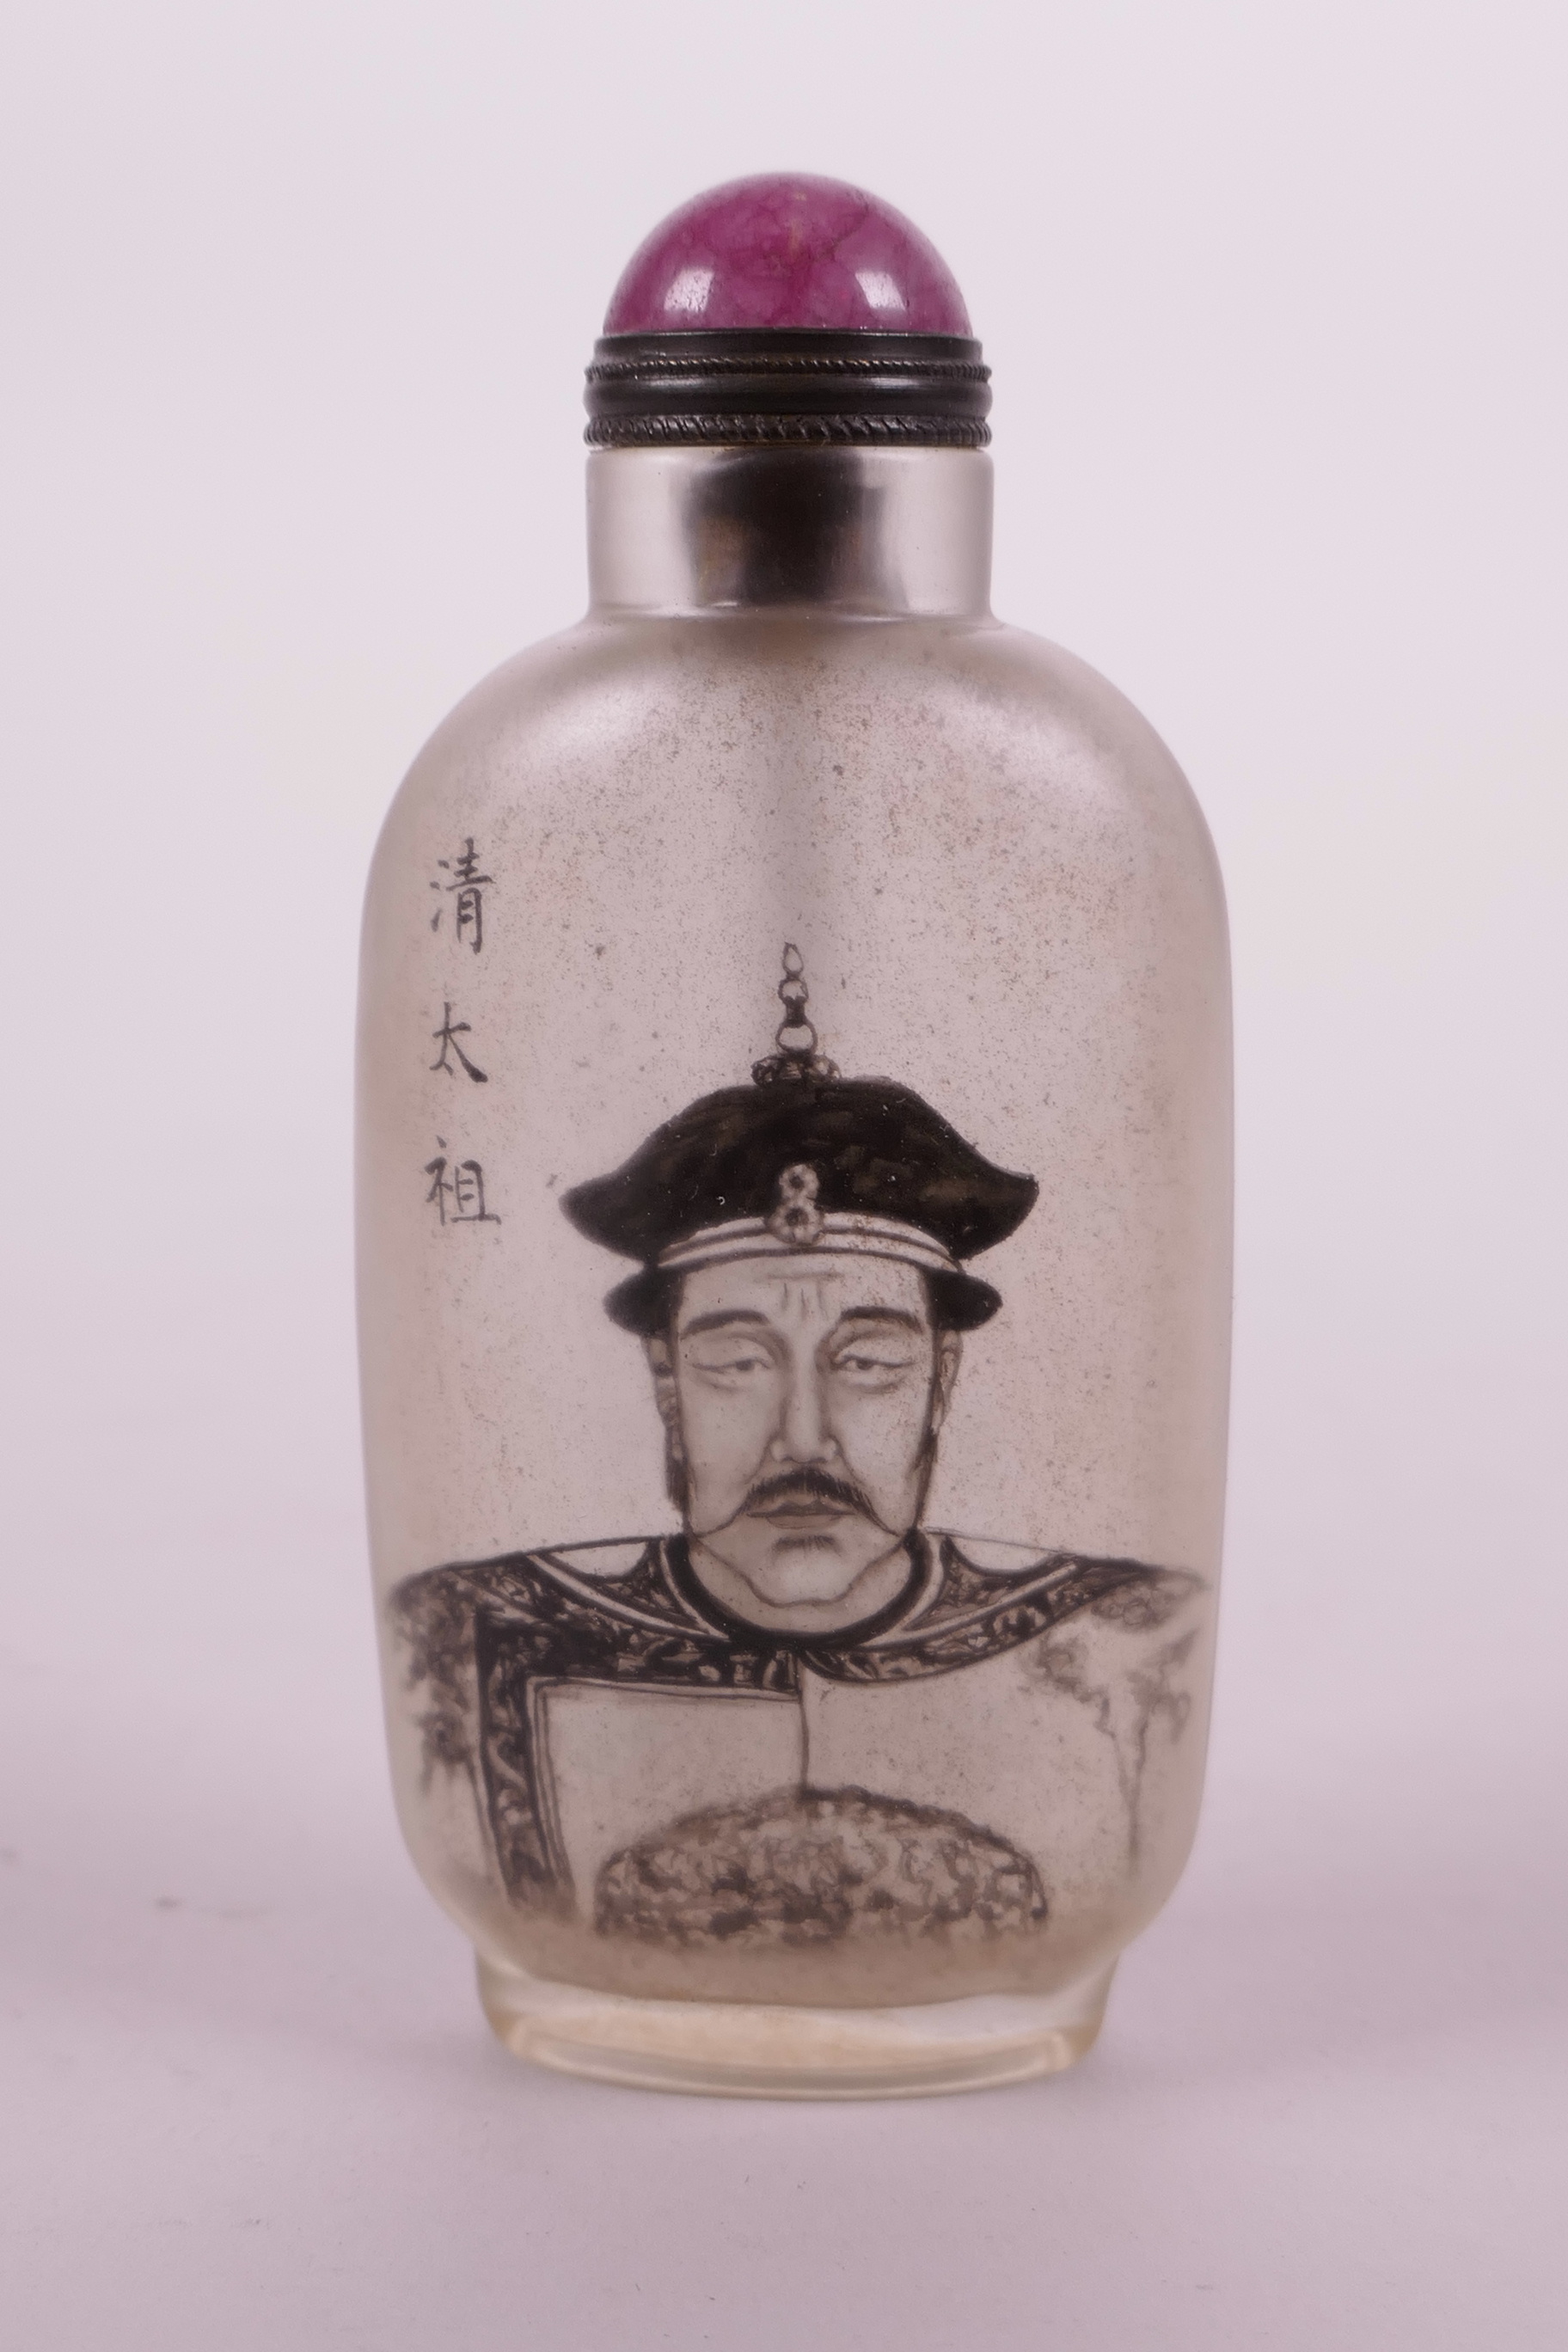 A Chinese reverse painted glass snuff bottle decorated with a monochrome portrait of a Chinese